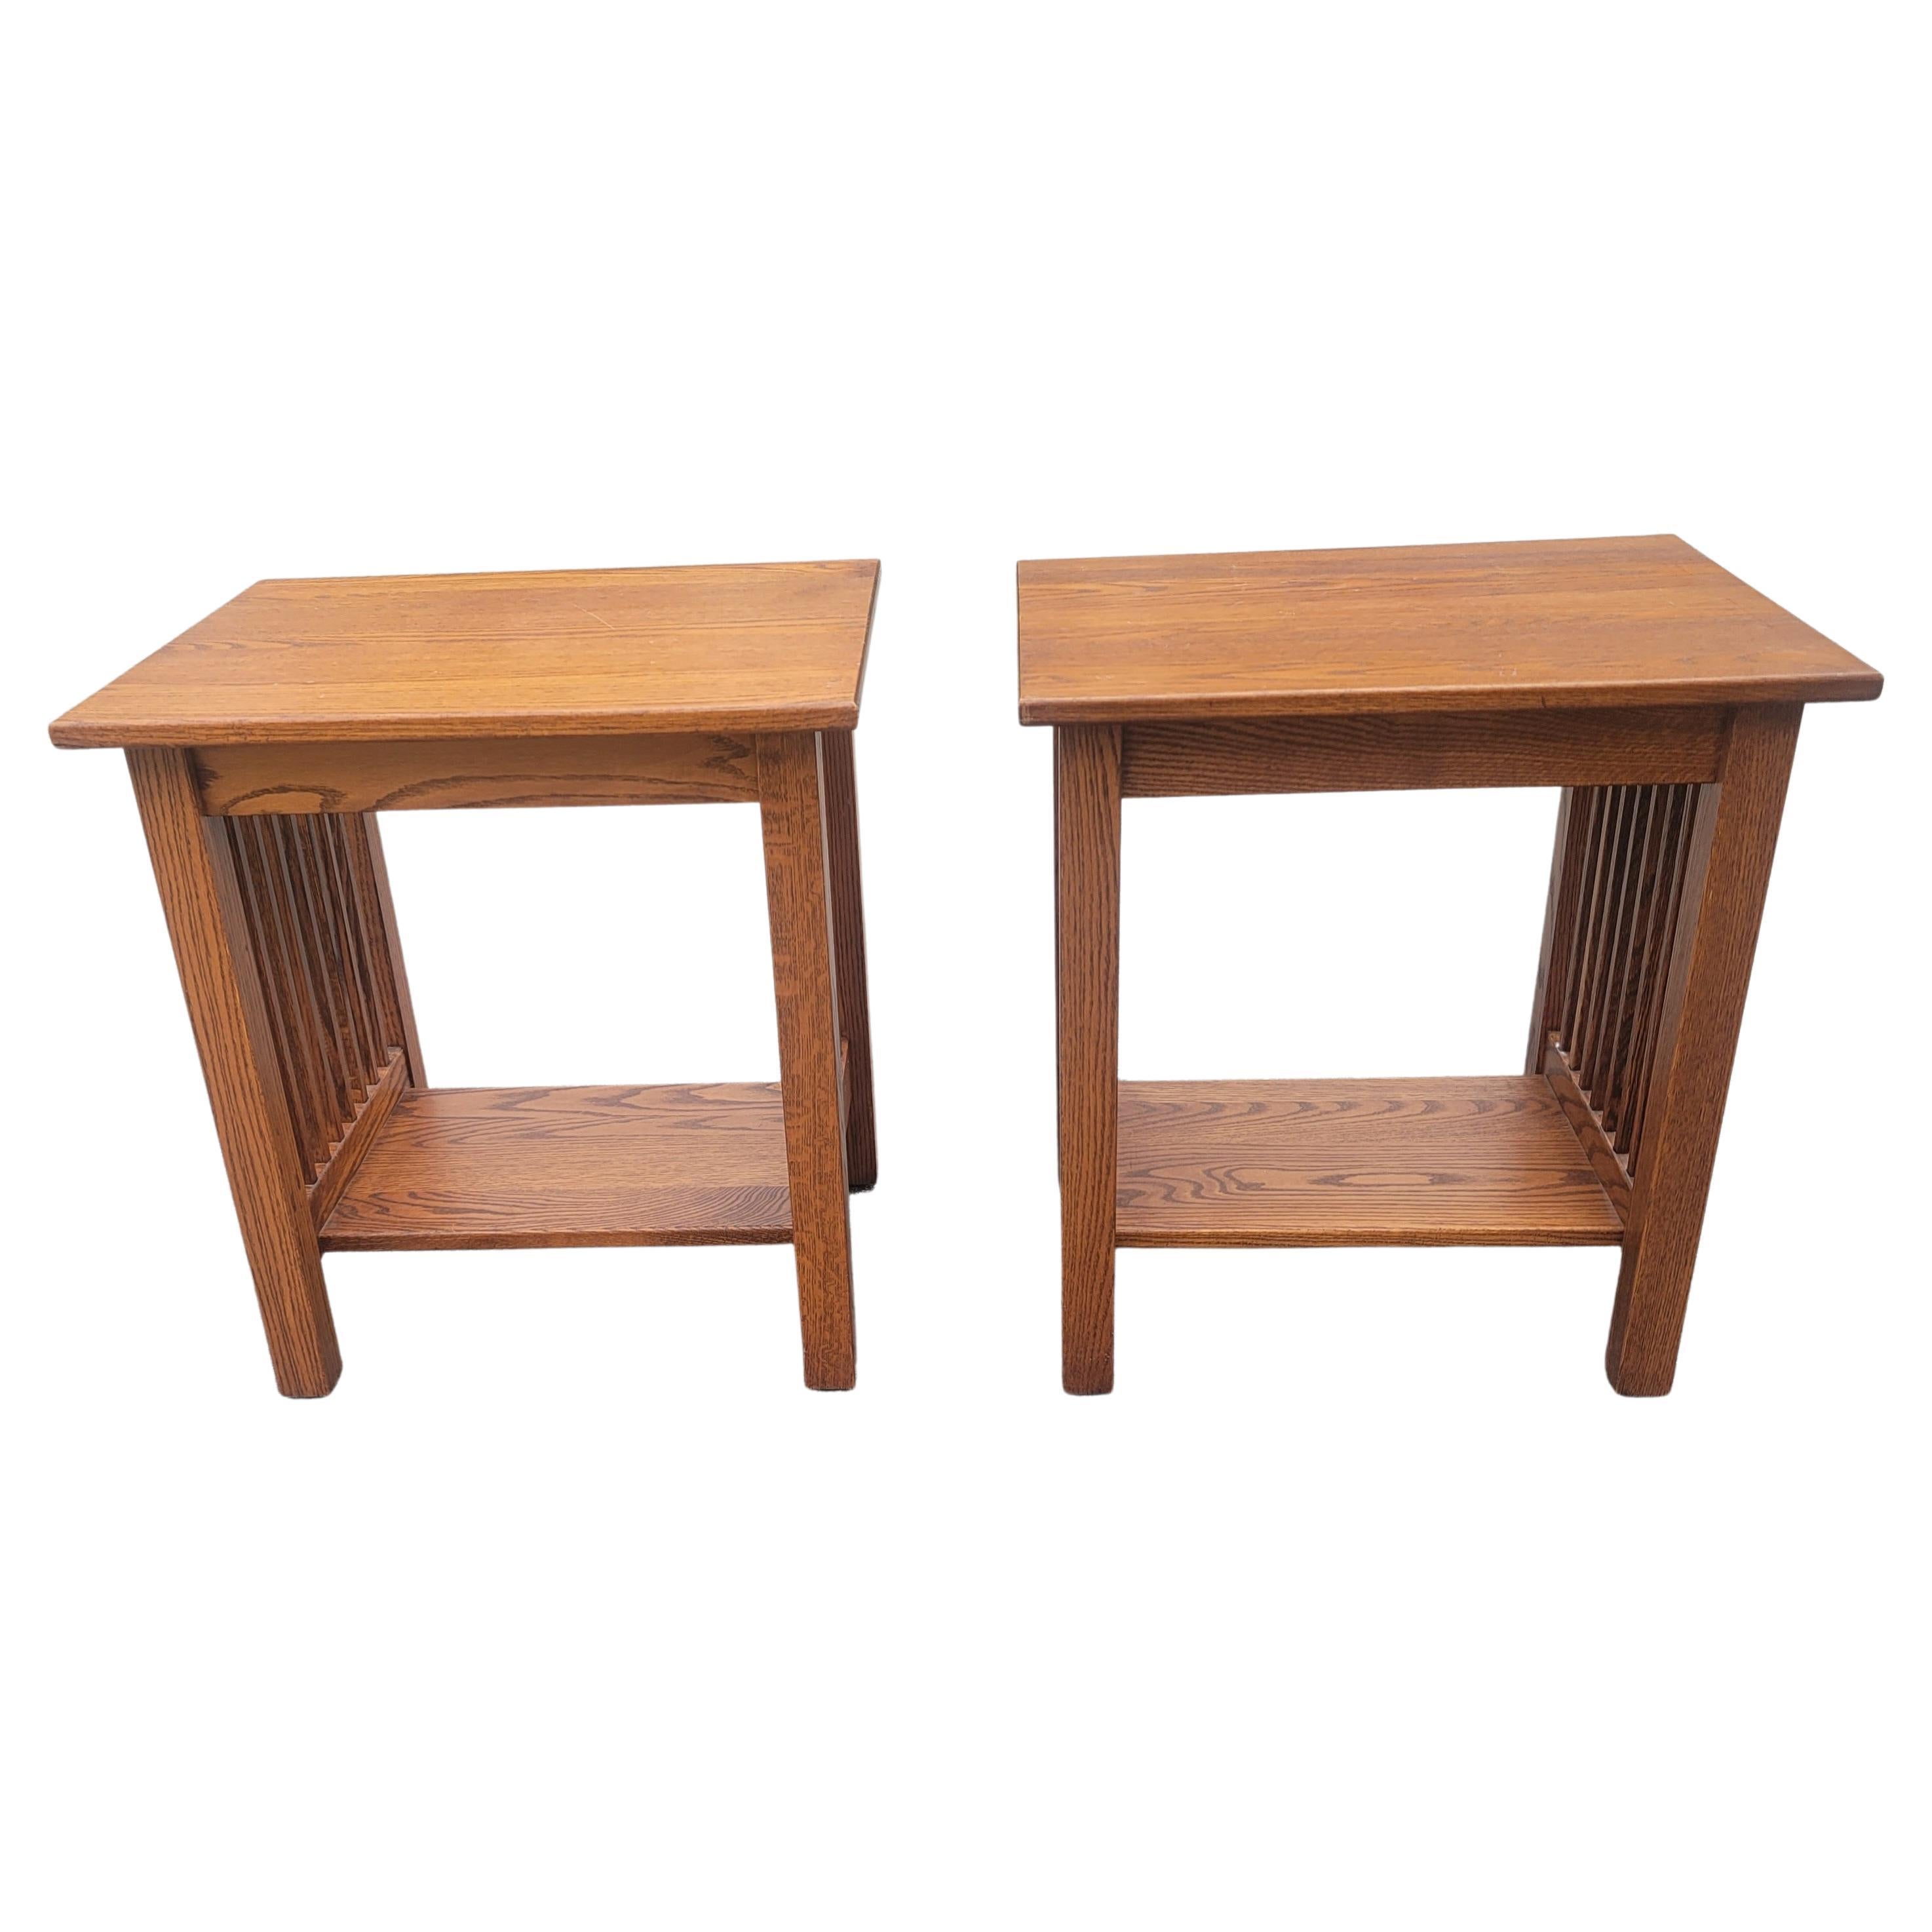 Country View Amish Arts & Crafts Mission Oak Side Tables, a Pair In Good Condition For Sale In Germantown, MD